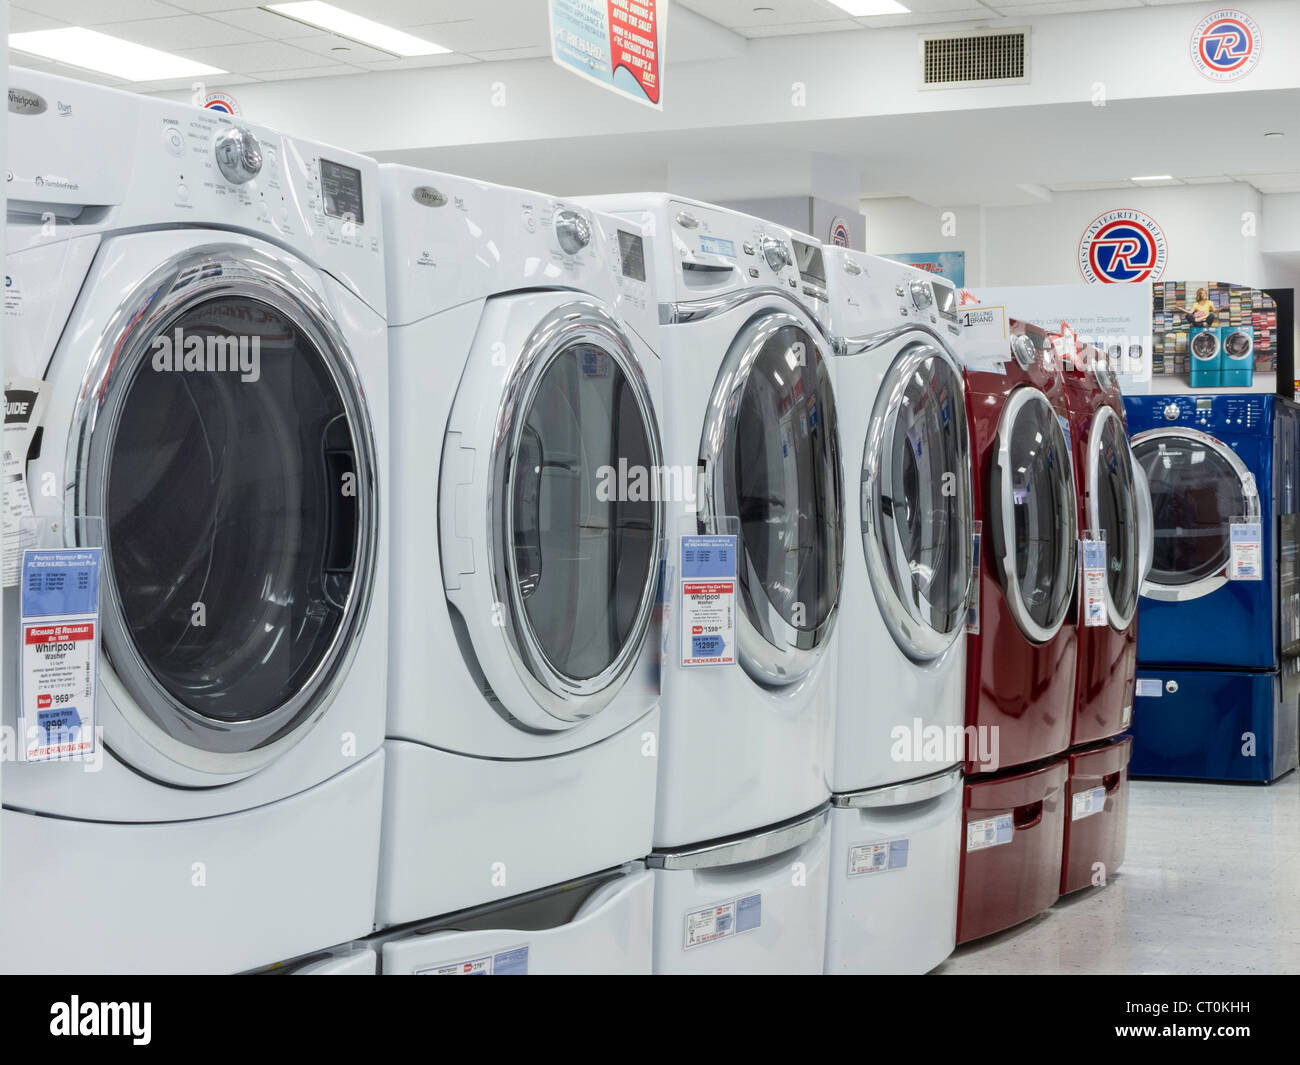 Washers and Dryers For Sale in Appliance Store Stock Photo